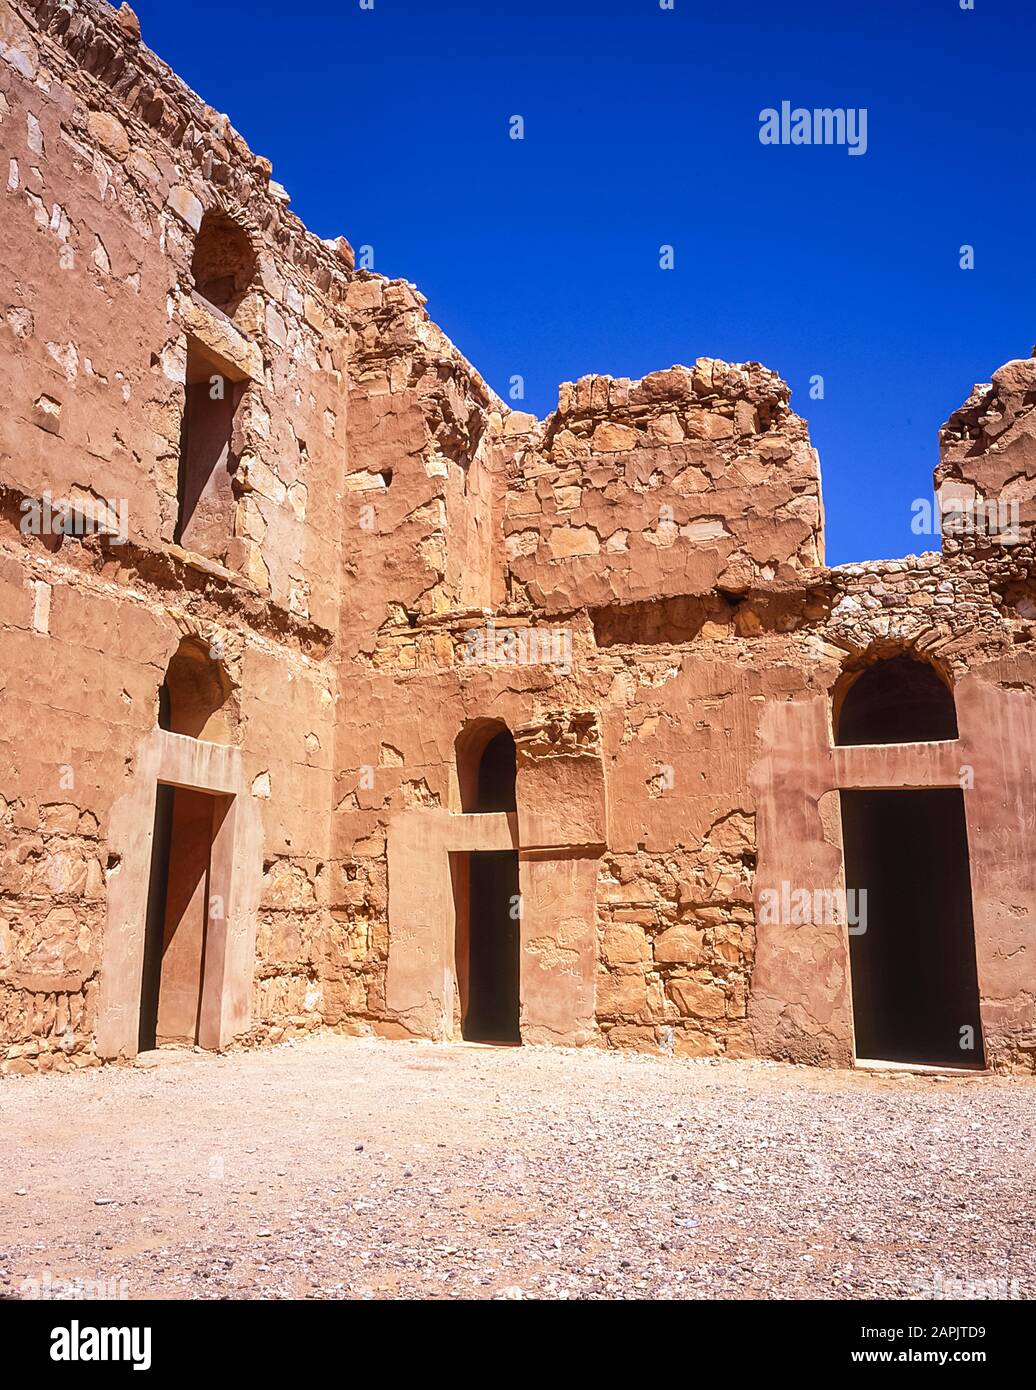 Jordan. The renovated site of the Qasr Al Kharanah caravanserai fortress. Hotel and place of sanctuary on the ancient Silk Route established across the Middle East. The fortress is perhaps the best preserved, restored castle in Jordan. Stock Photo